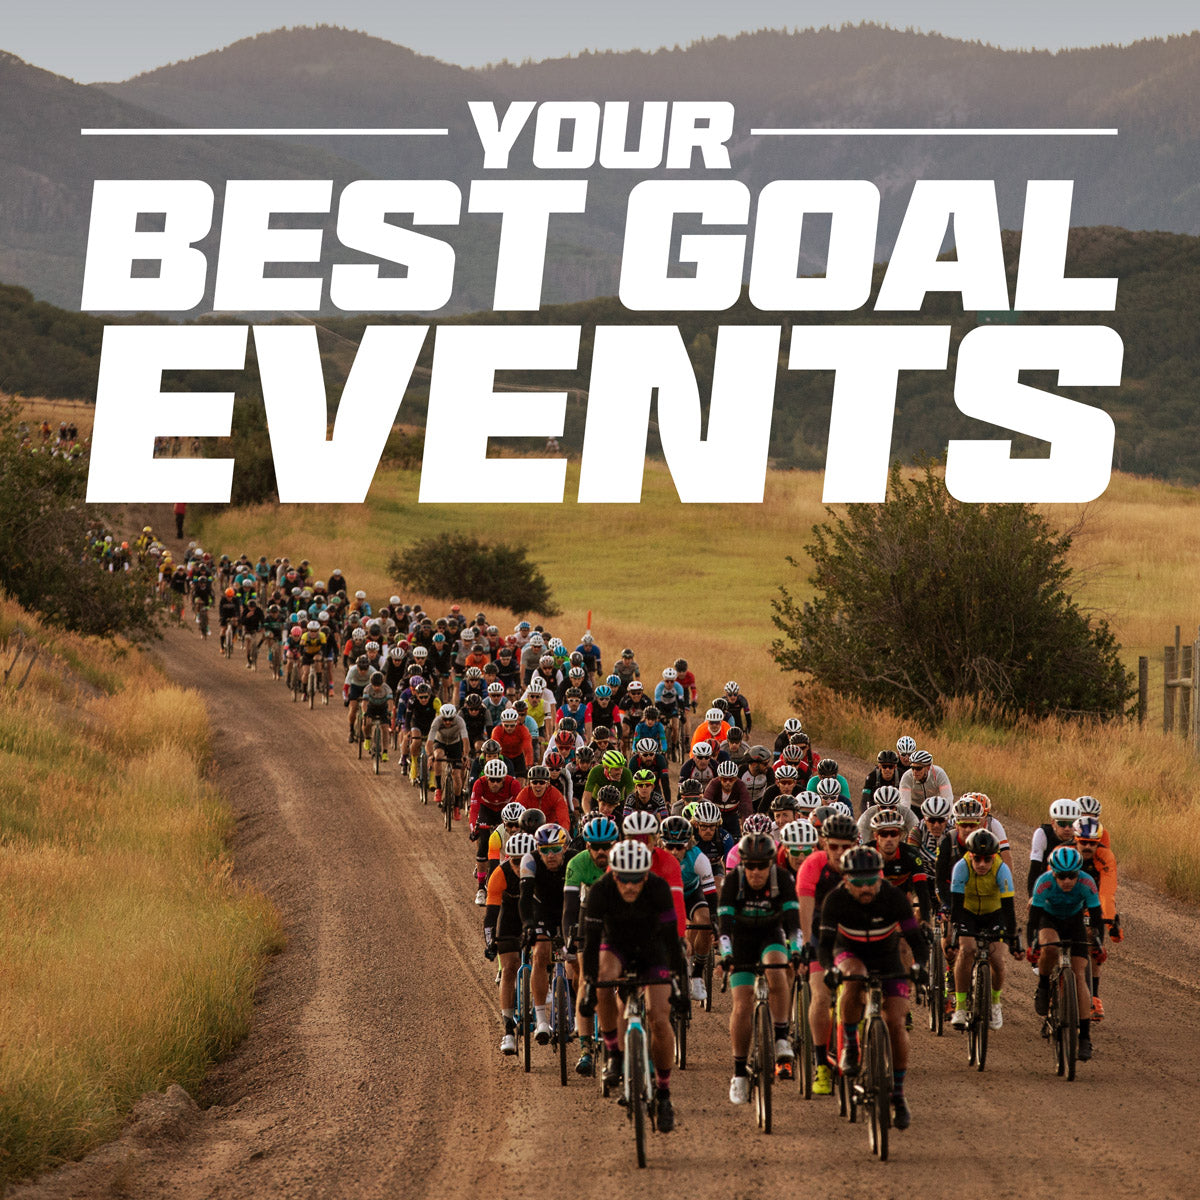 How to prioritize events for optimal training and enjoyment